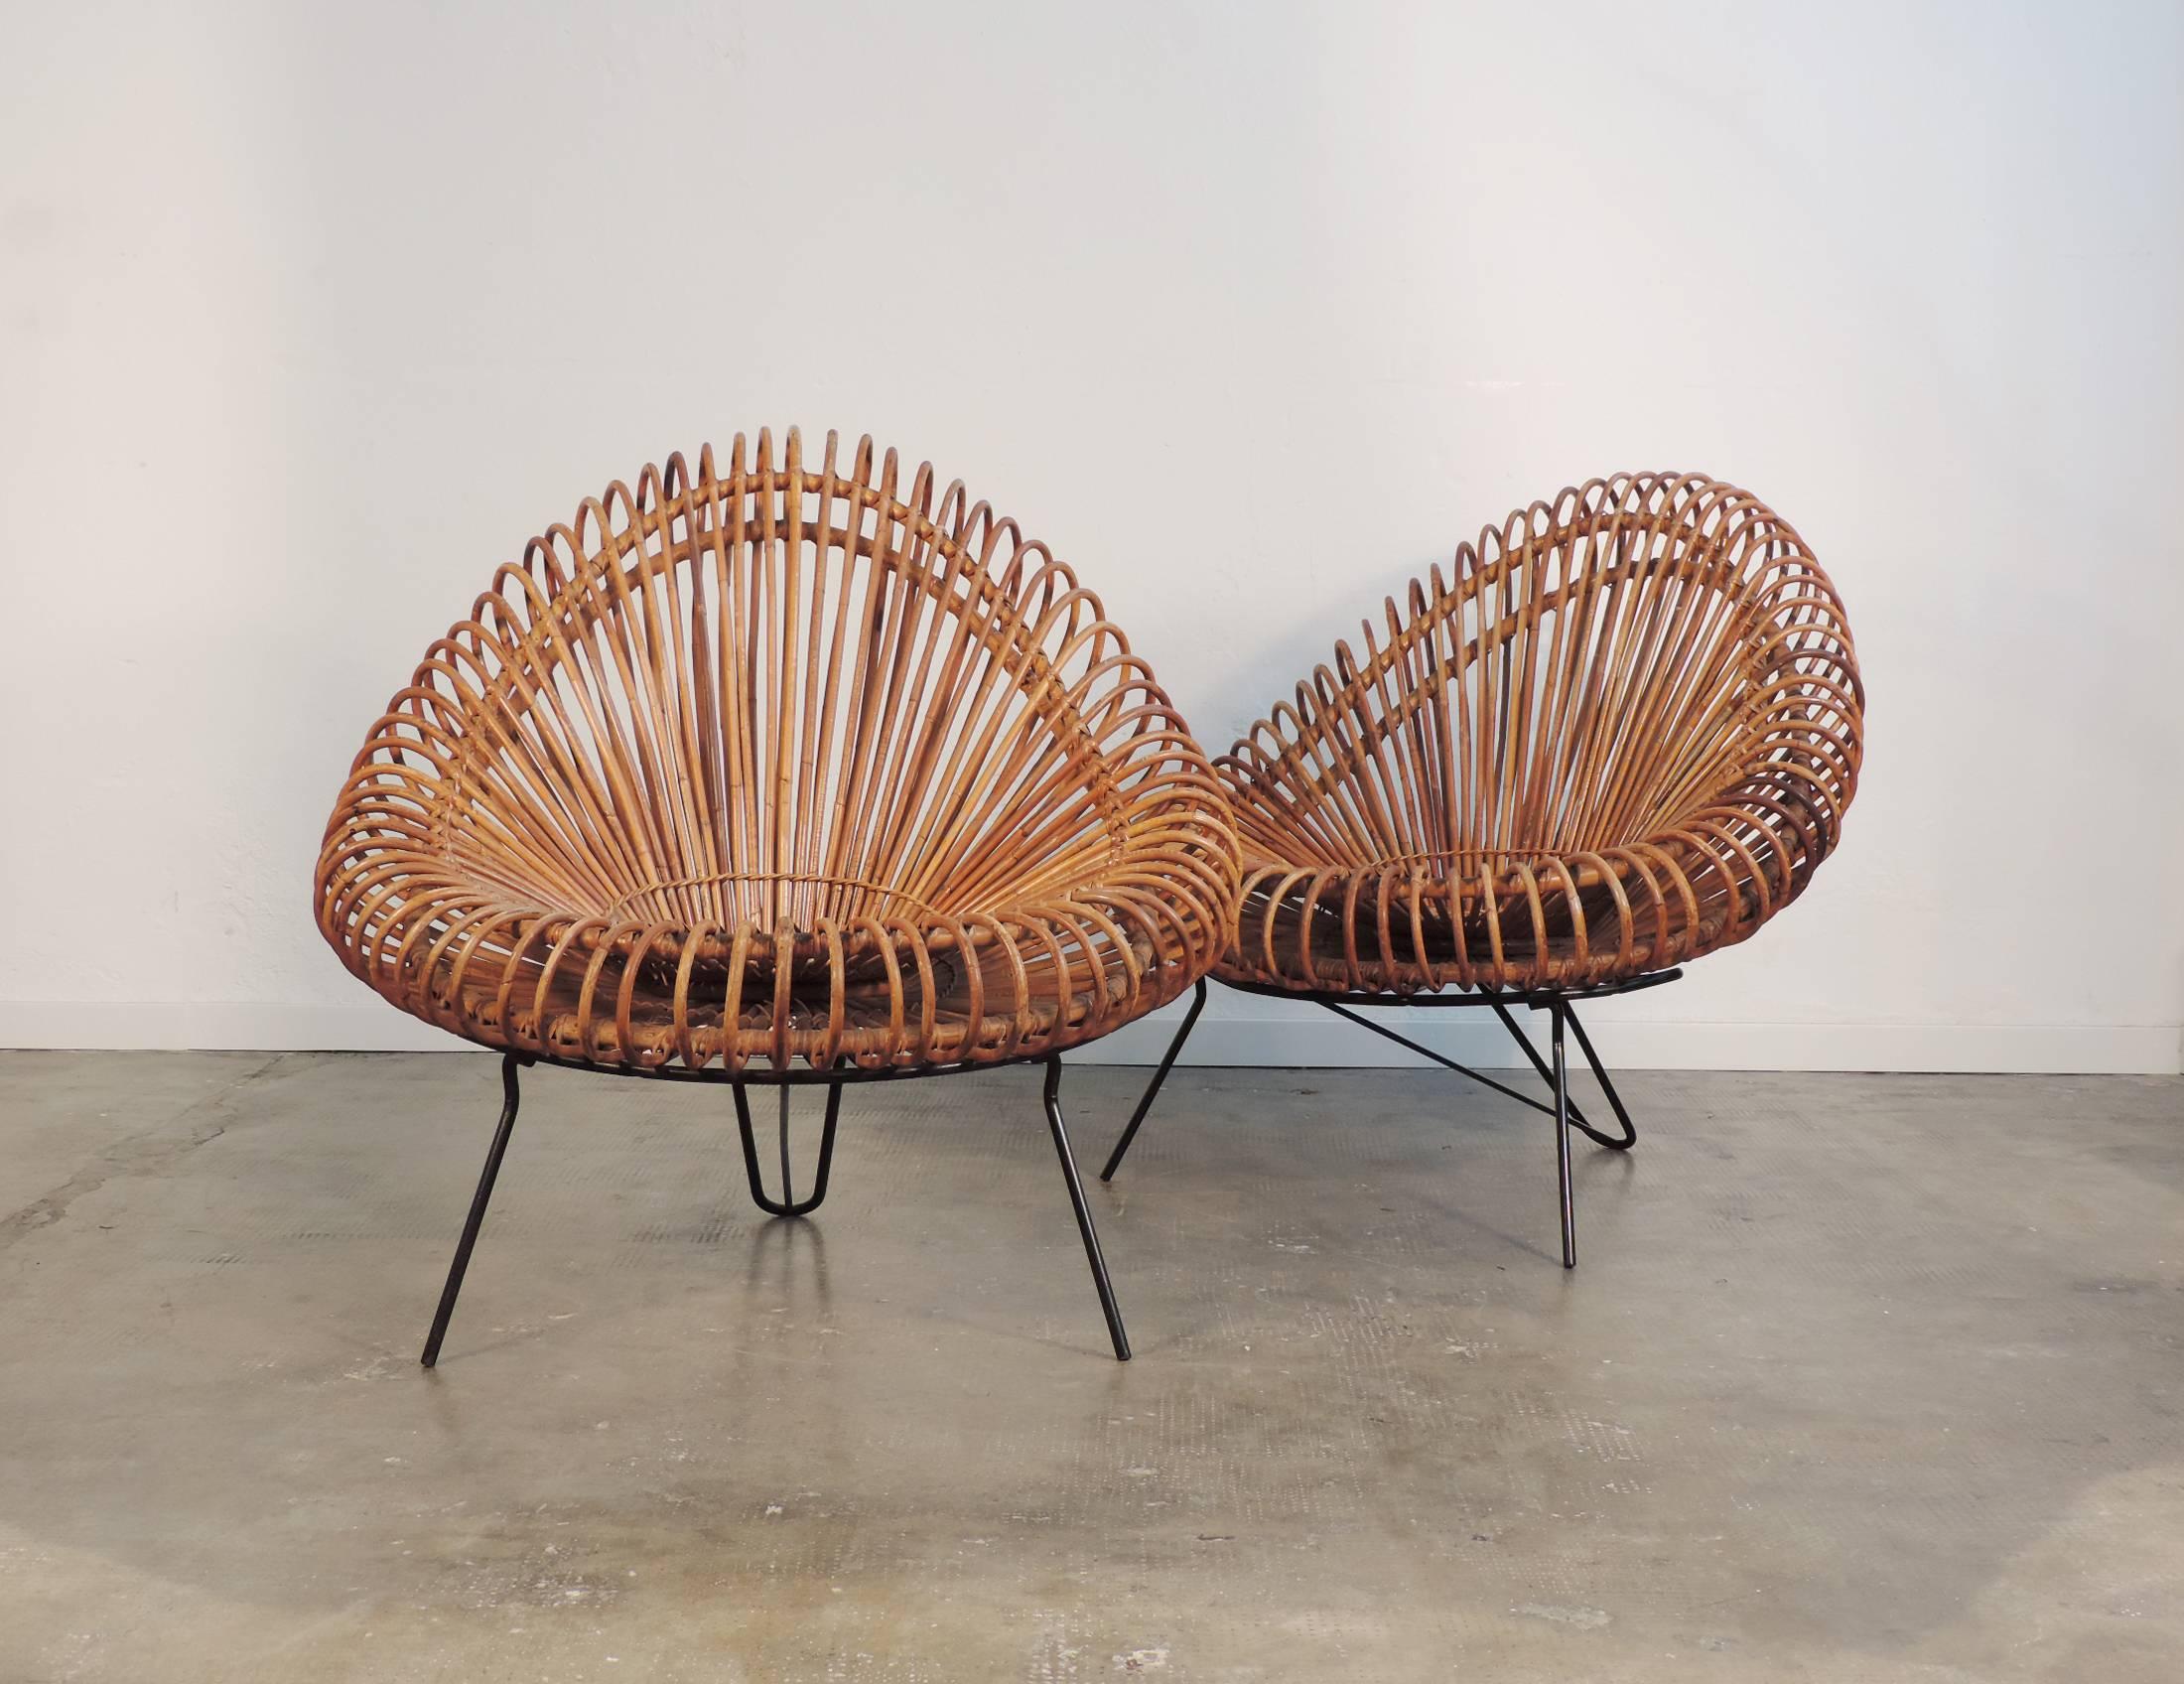 Splendid pair of Rattan armchairs attributed to Franco Albini.
At the moment there is no official documentation regarding the designer. These were manufactured in Italy and sold through La Rinascente.